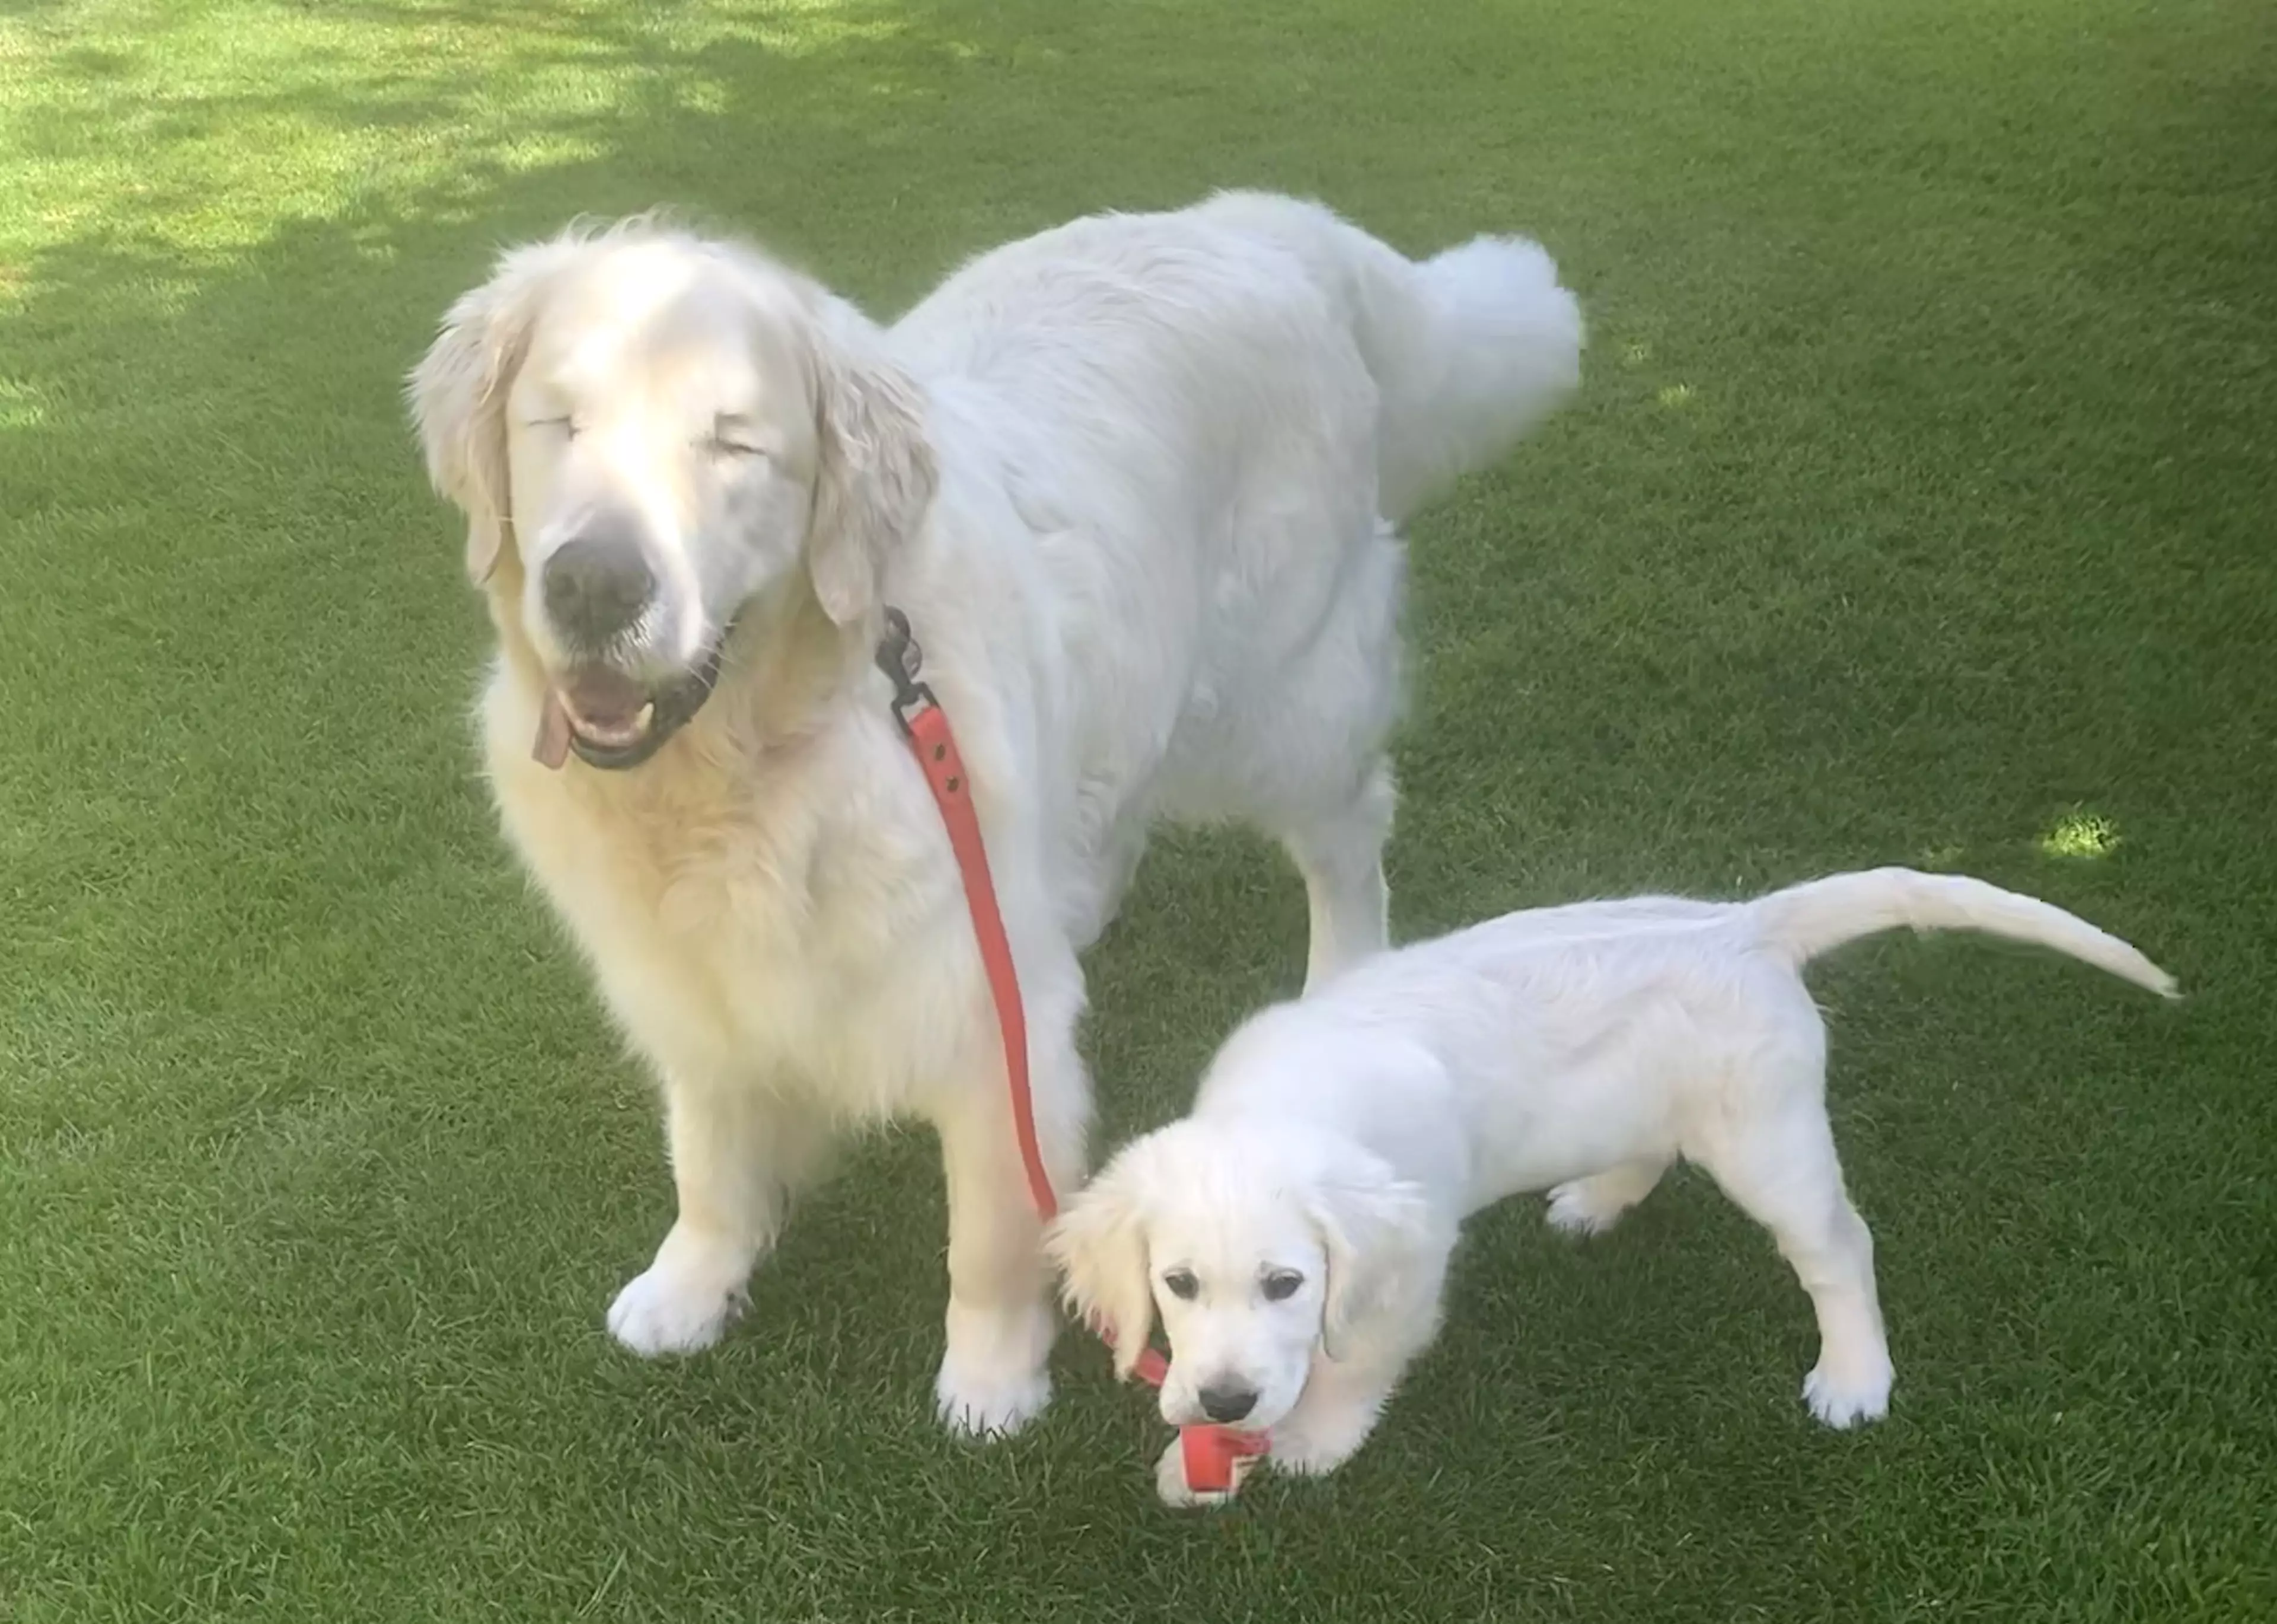 The Golden Retriever and pup take walks together (